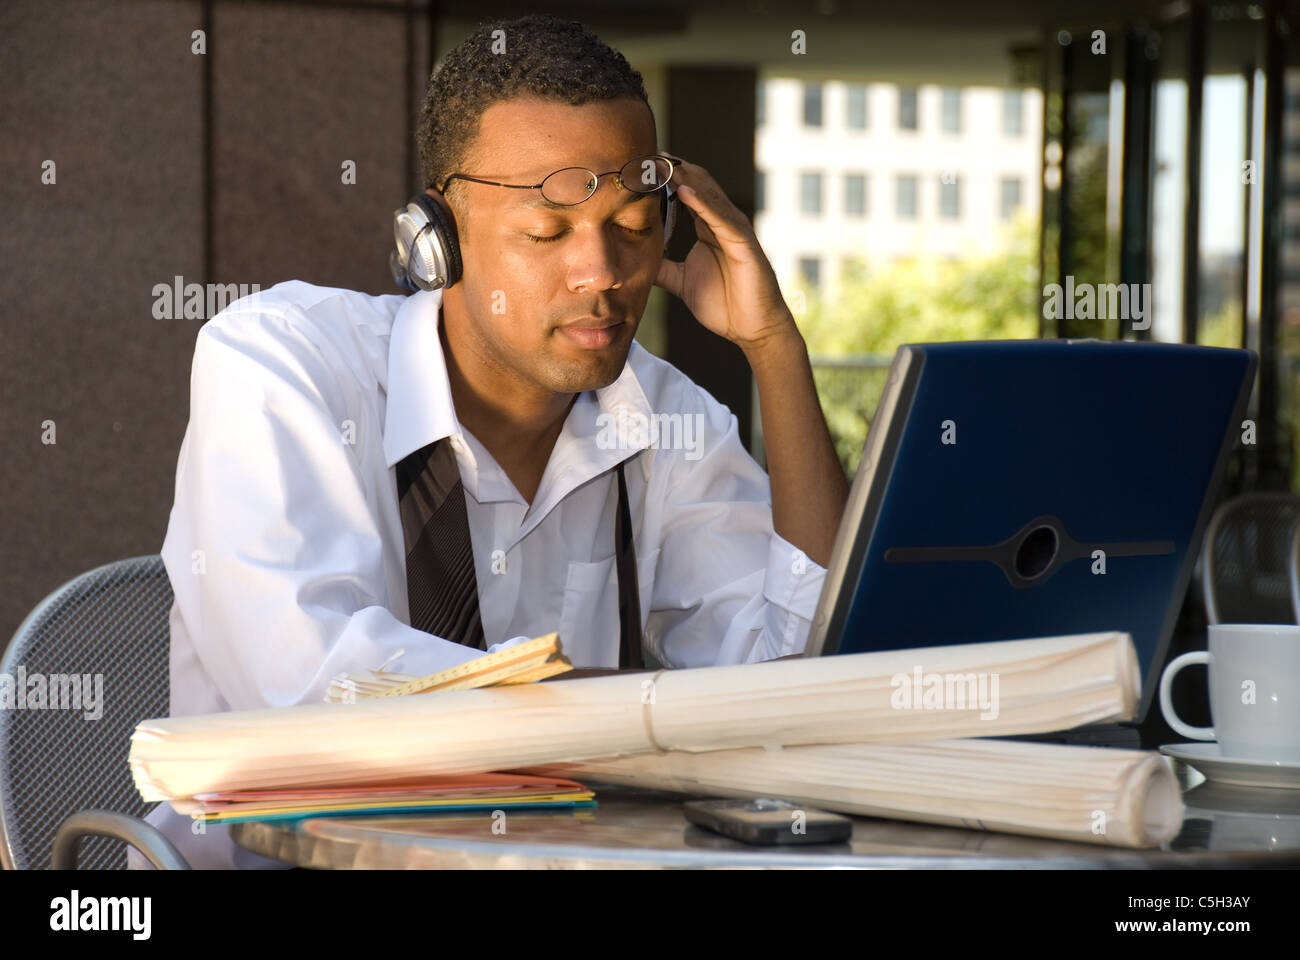 An executive engineer conducting work during his lunch hour decides to take a break and listen to some music. Stock Photo